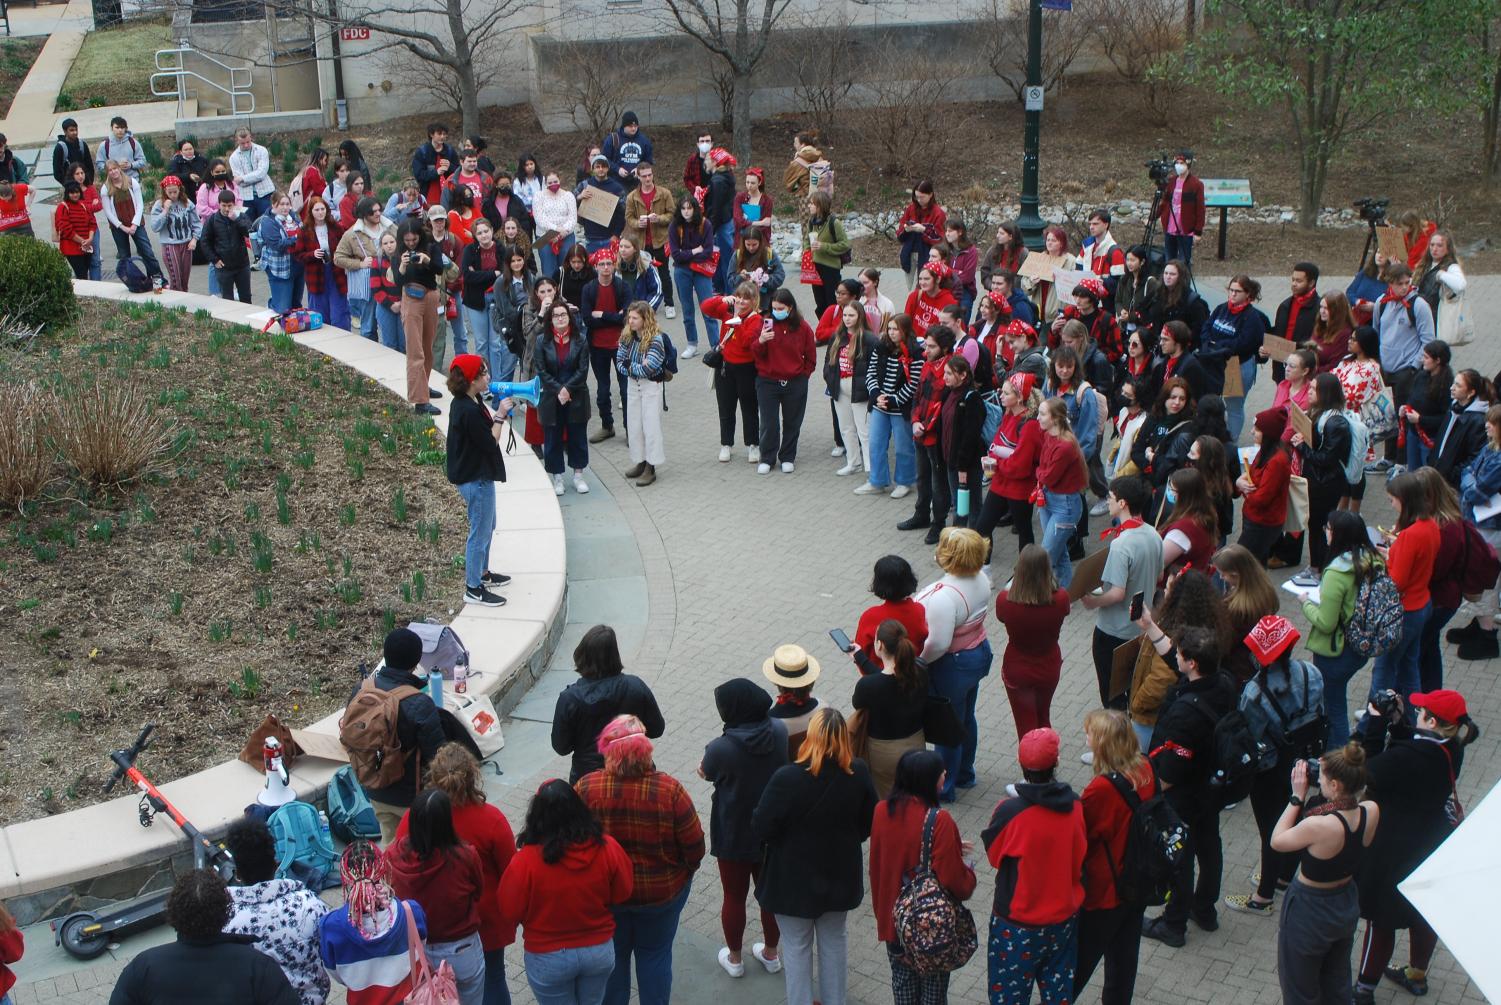 Three+months+later%3A+students+continue+to+protest+against+sexual+assault+on+campus